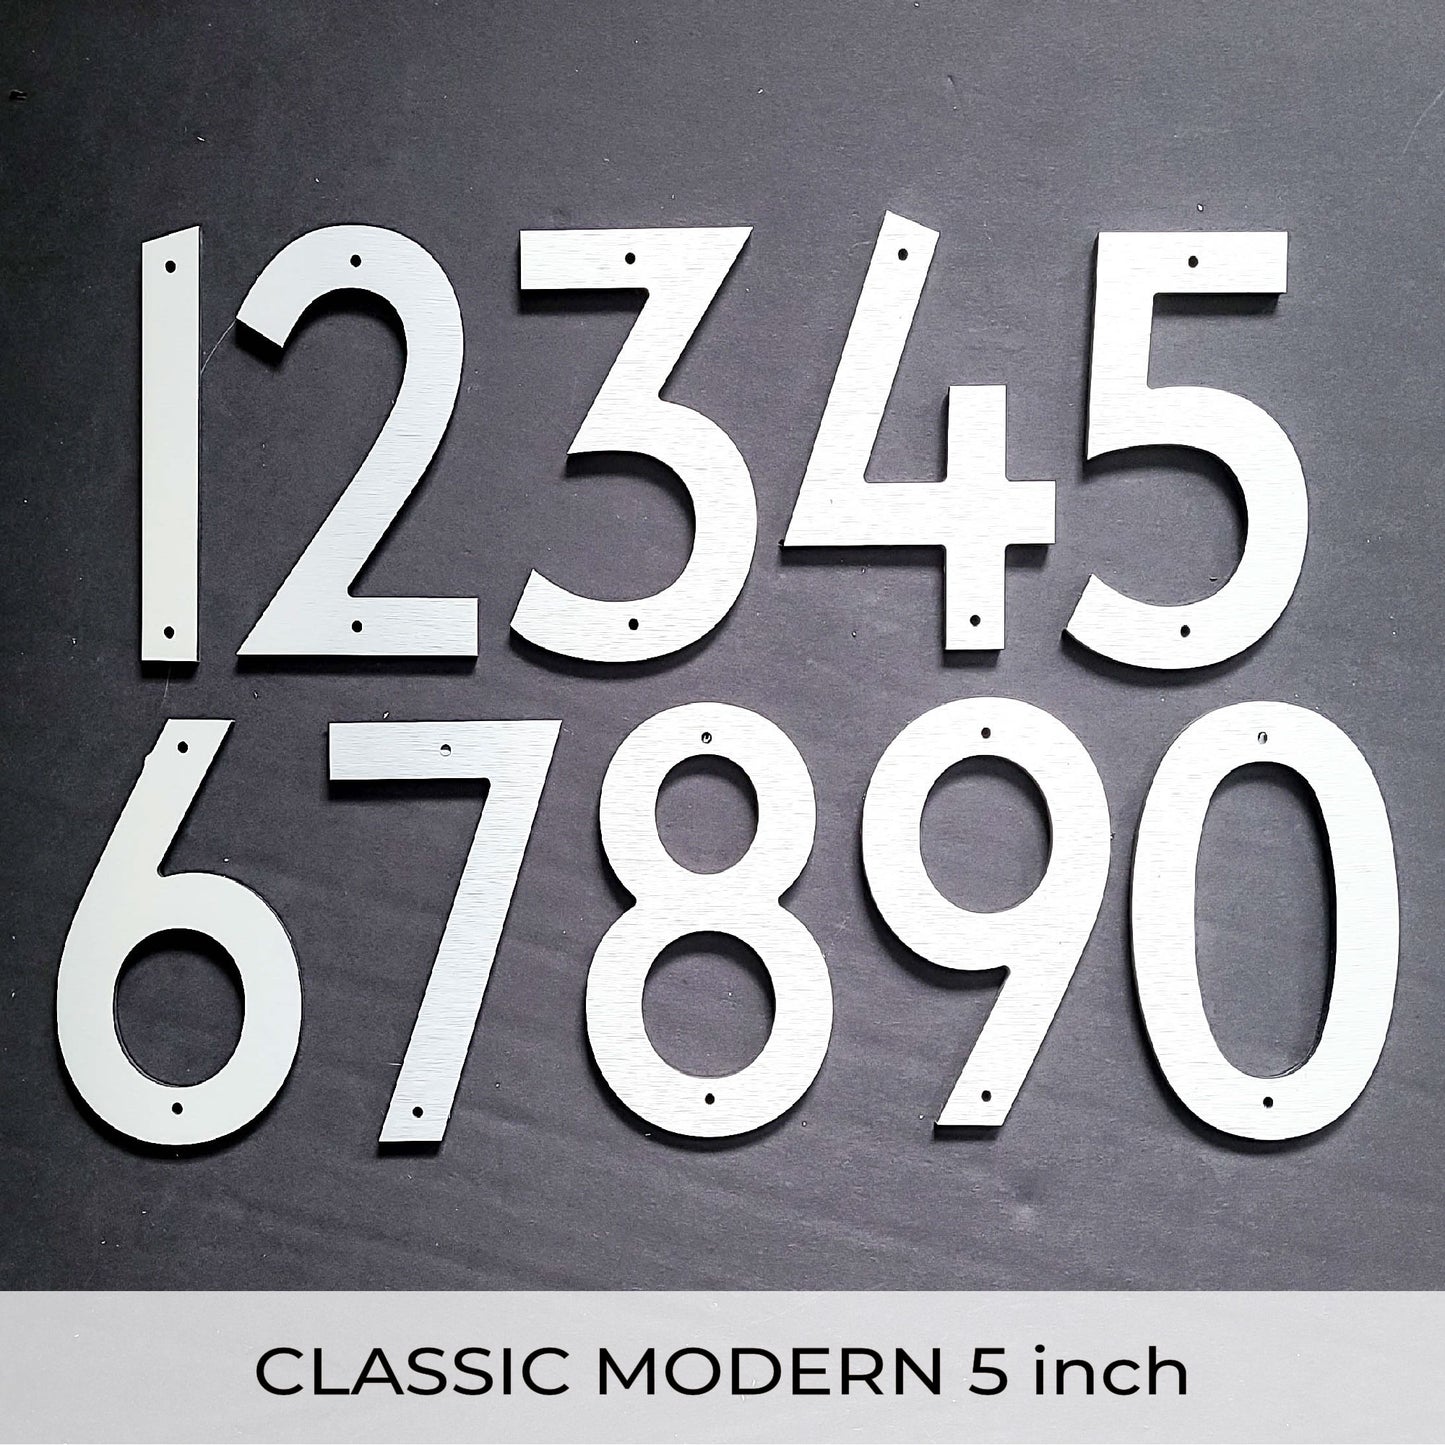 brushed silver CLASSIC MODERN house numbers and letters 